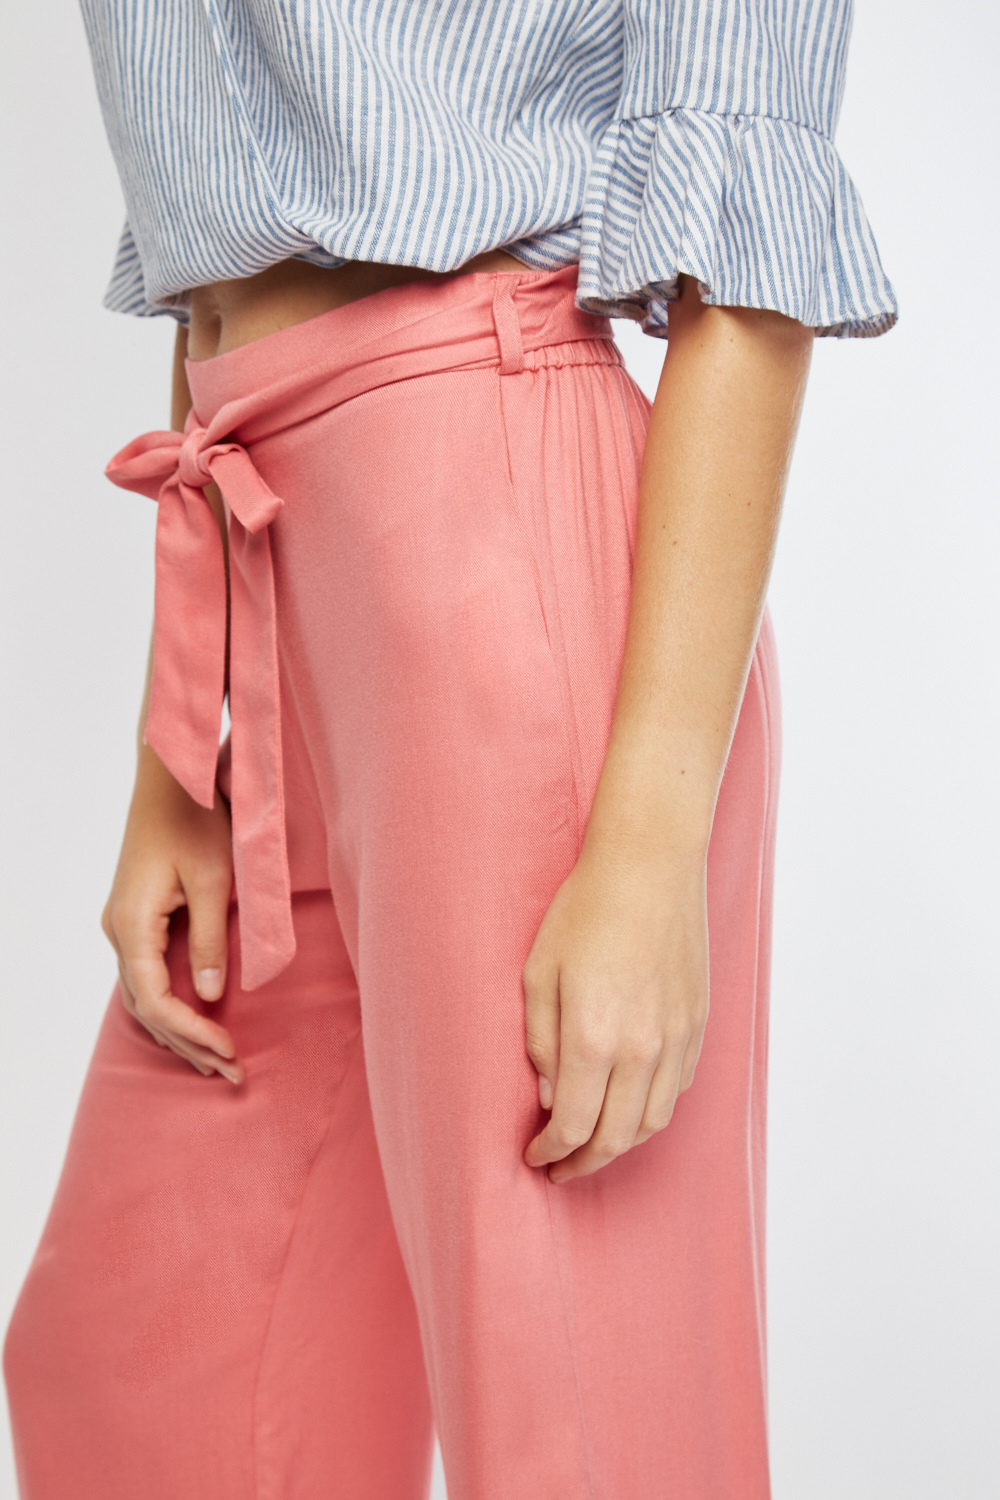 Belted Dusty  Pink  Culotte Pants  Just 7